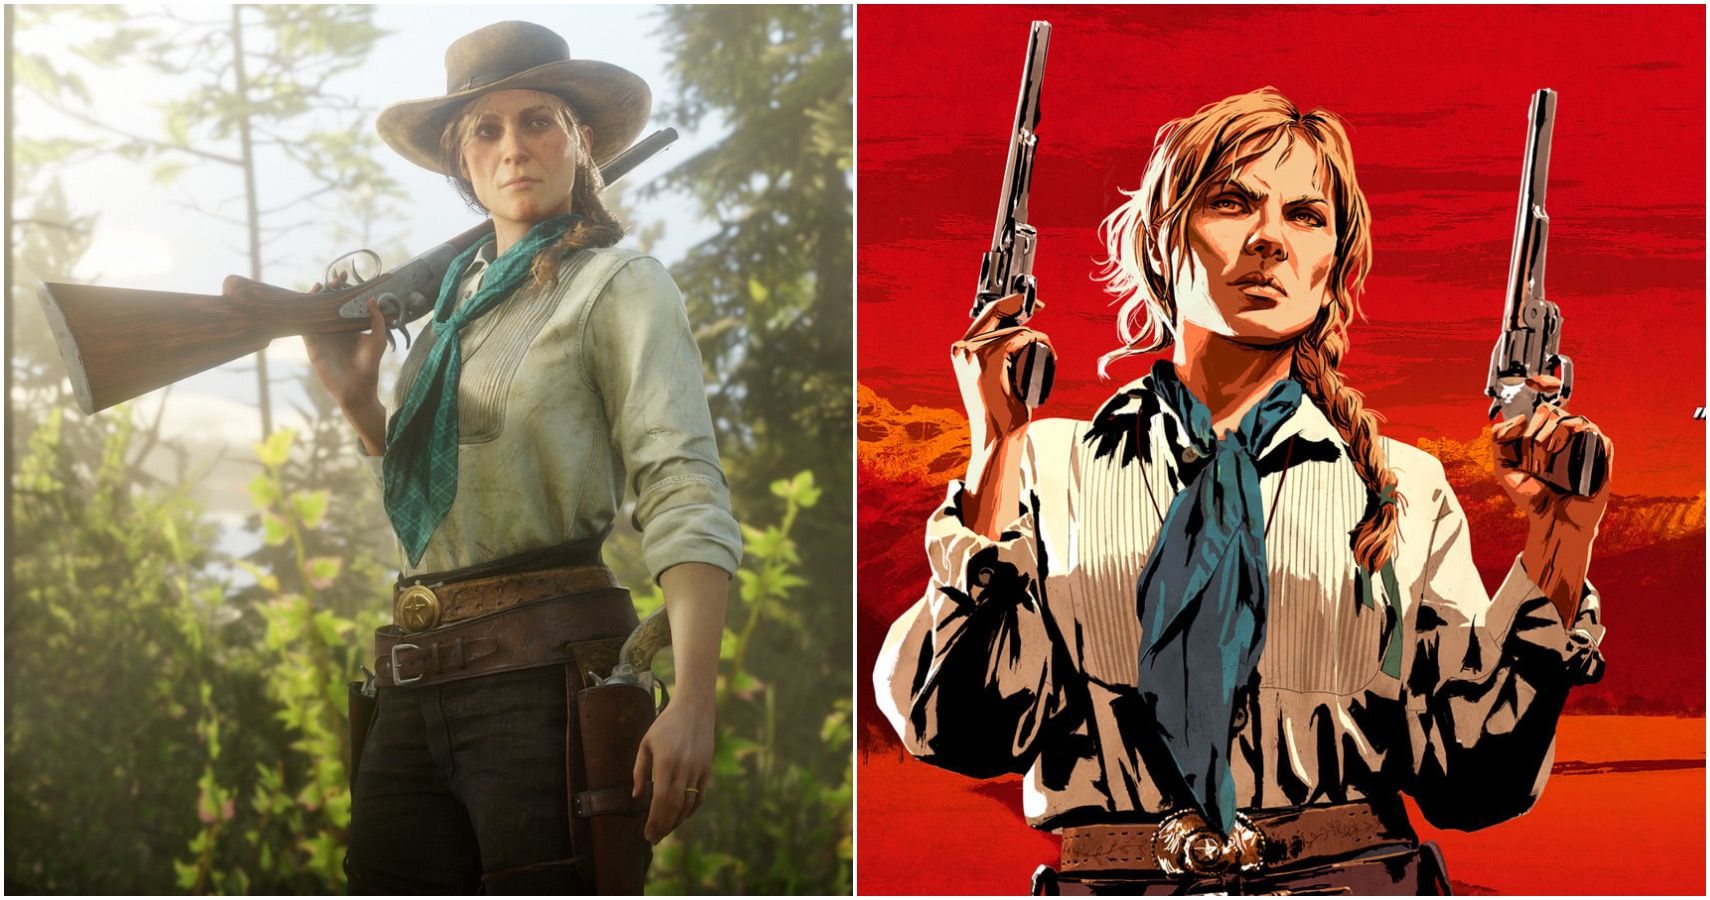 vil gøre Udholdenhed udtale Red Dead Redemption 2: 10 Things You Need To Know About Sadie Adler